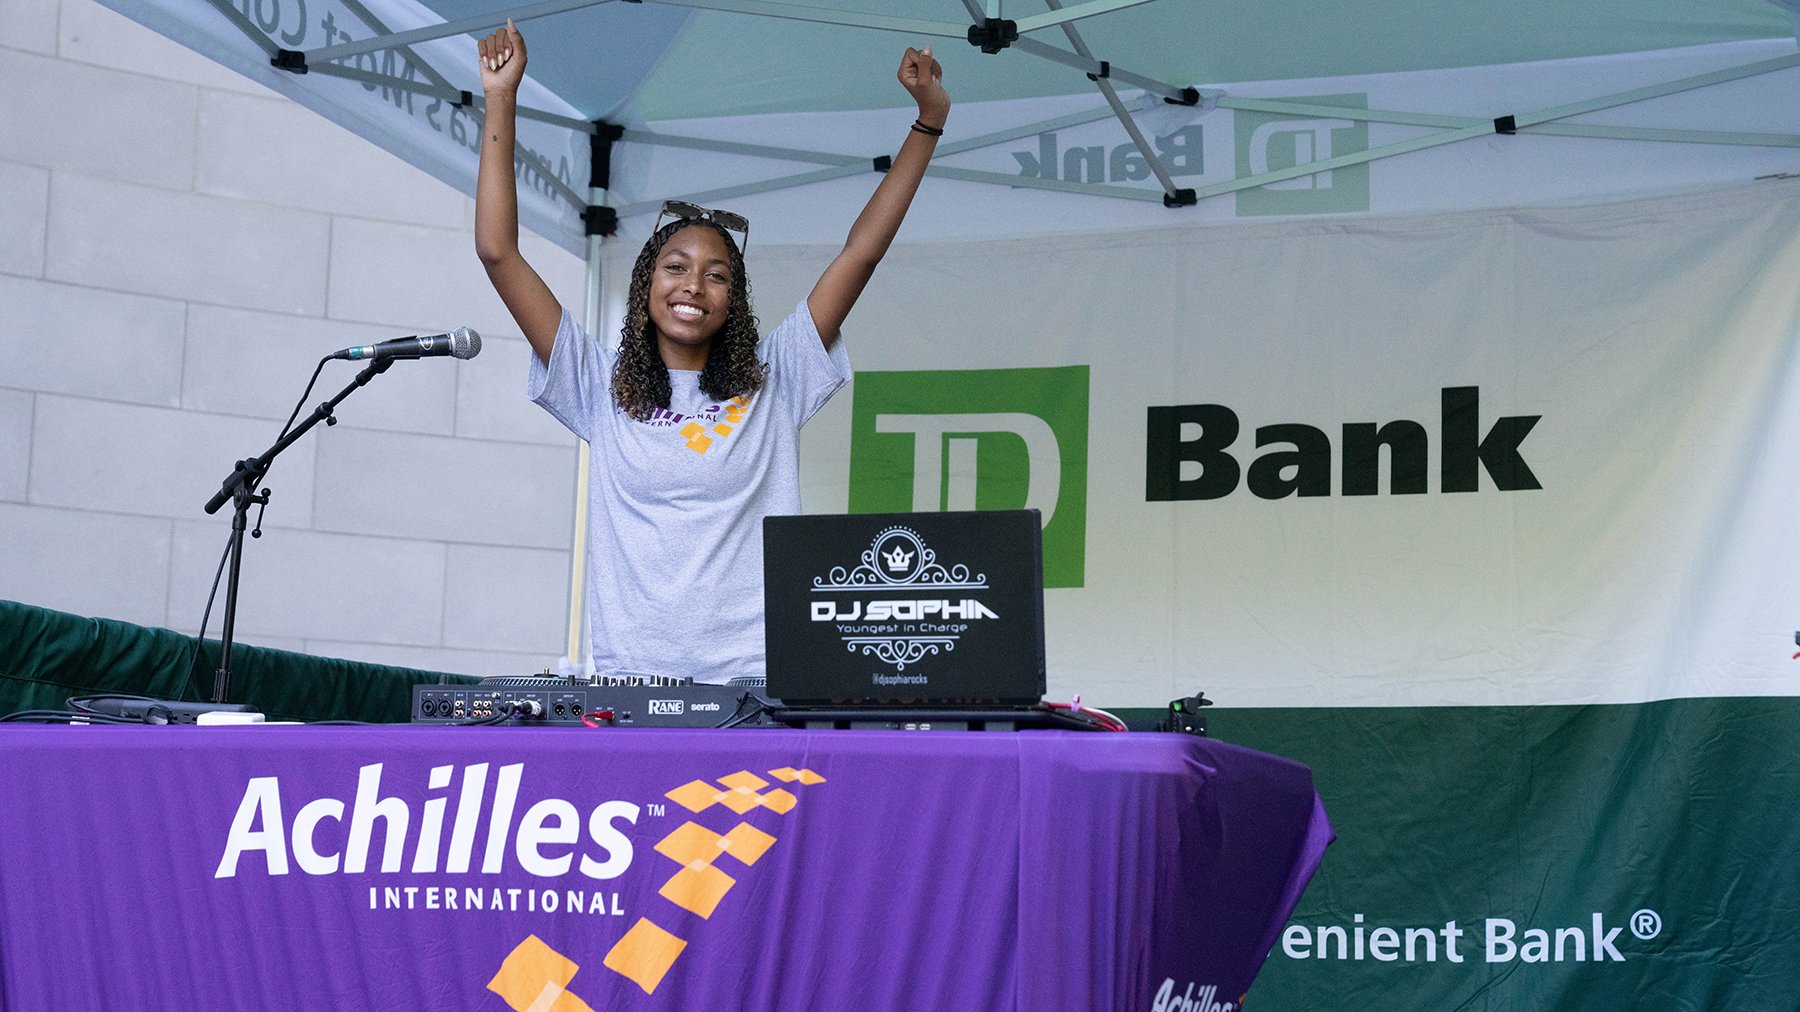  Photo of DJ Sophia Rocks cheering at her booth at the Bandshell celebration 